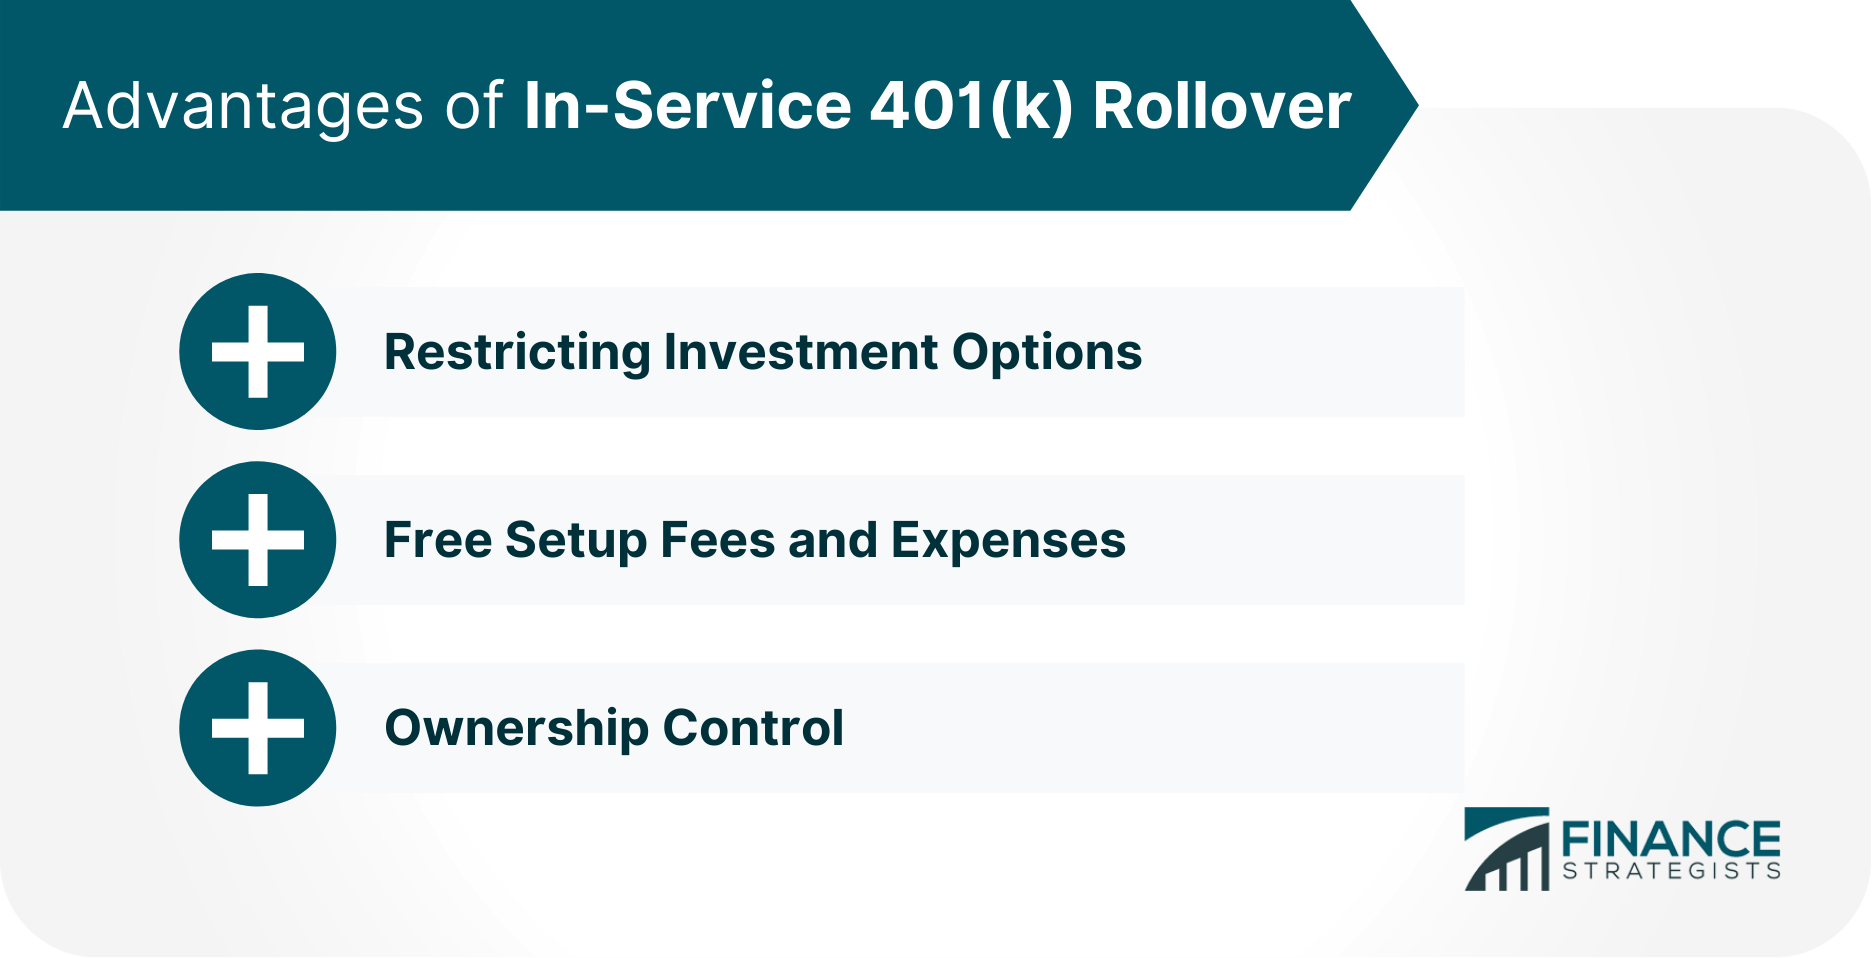 Advantages_of_In-Service_401(k)_Rollover